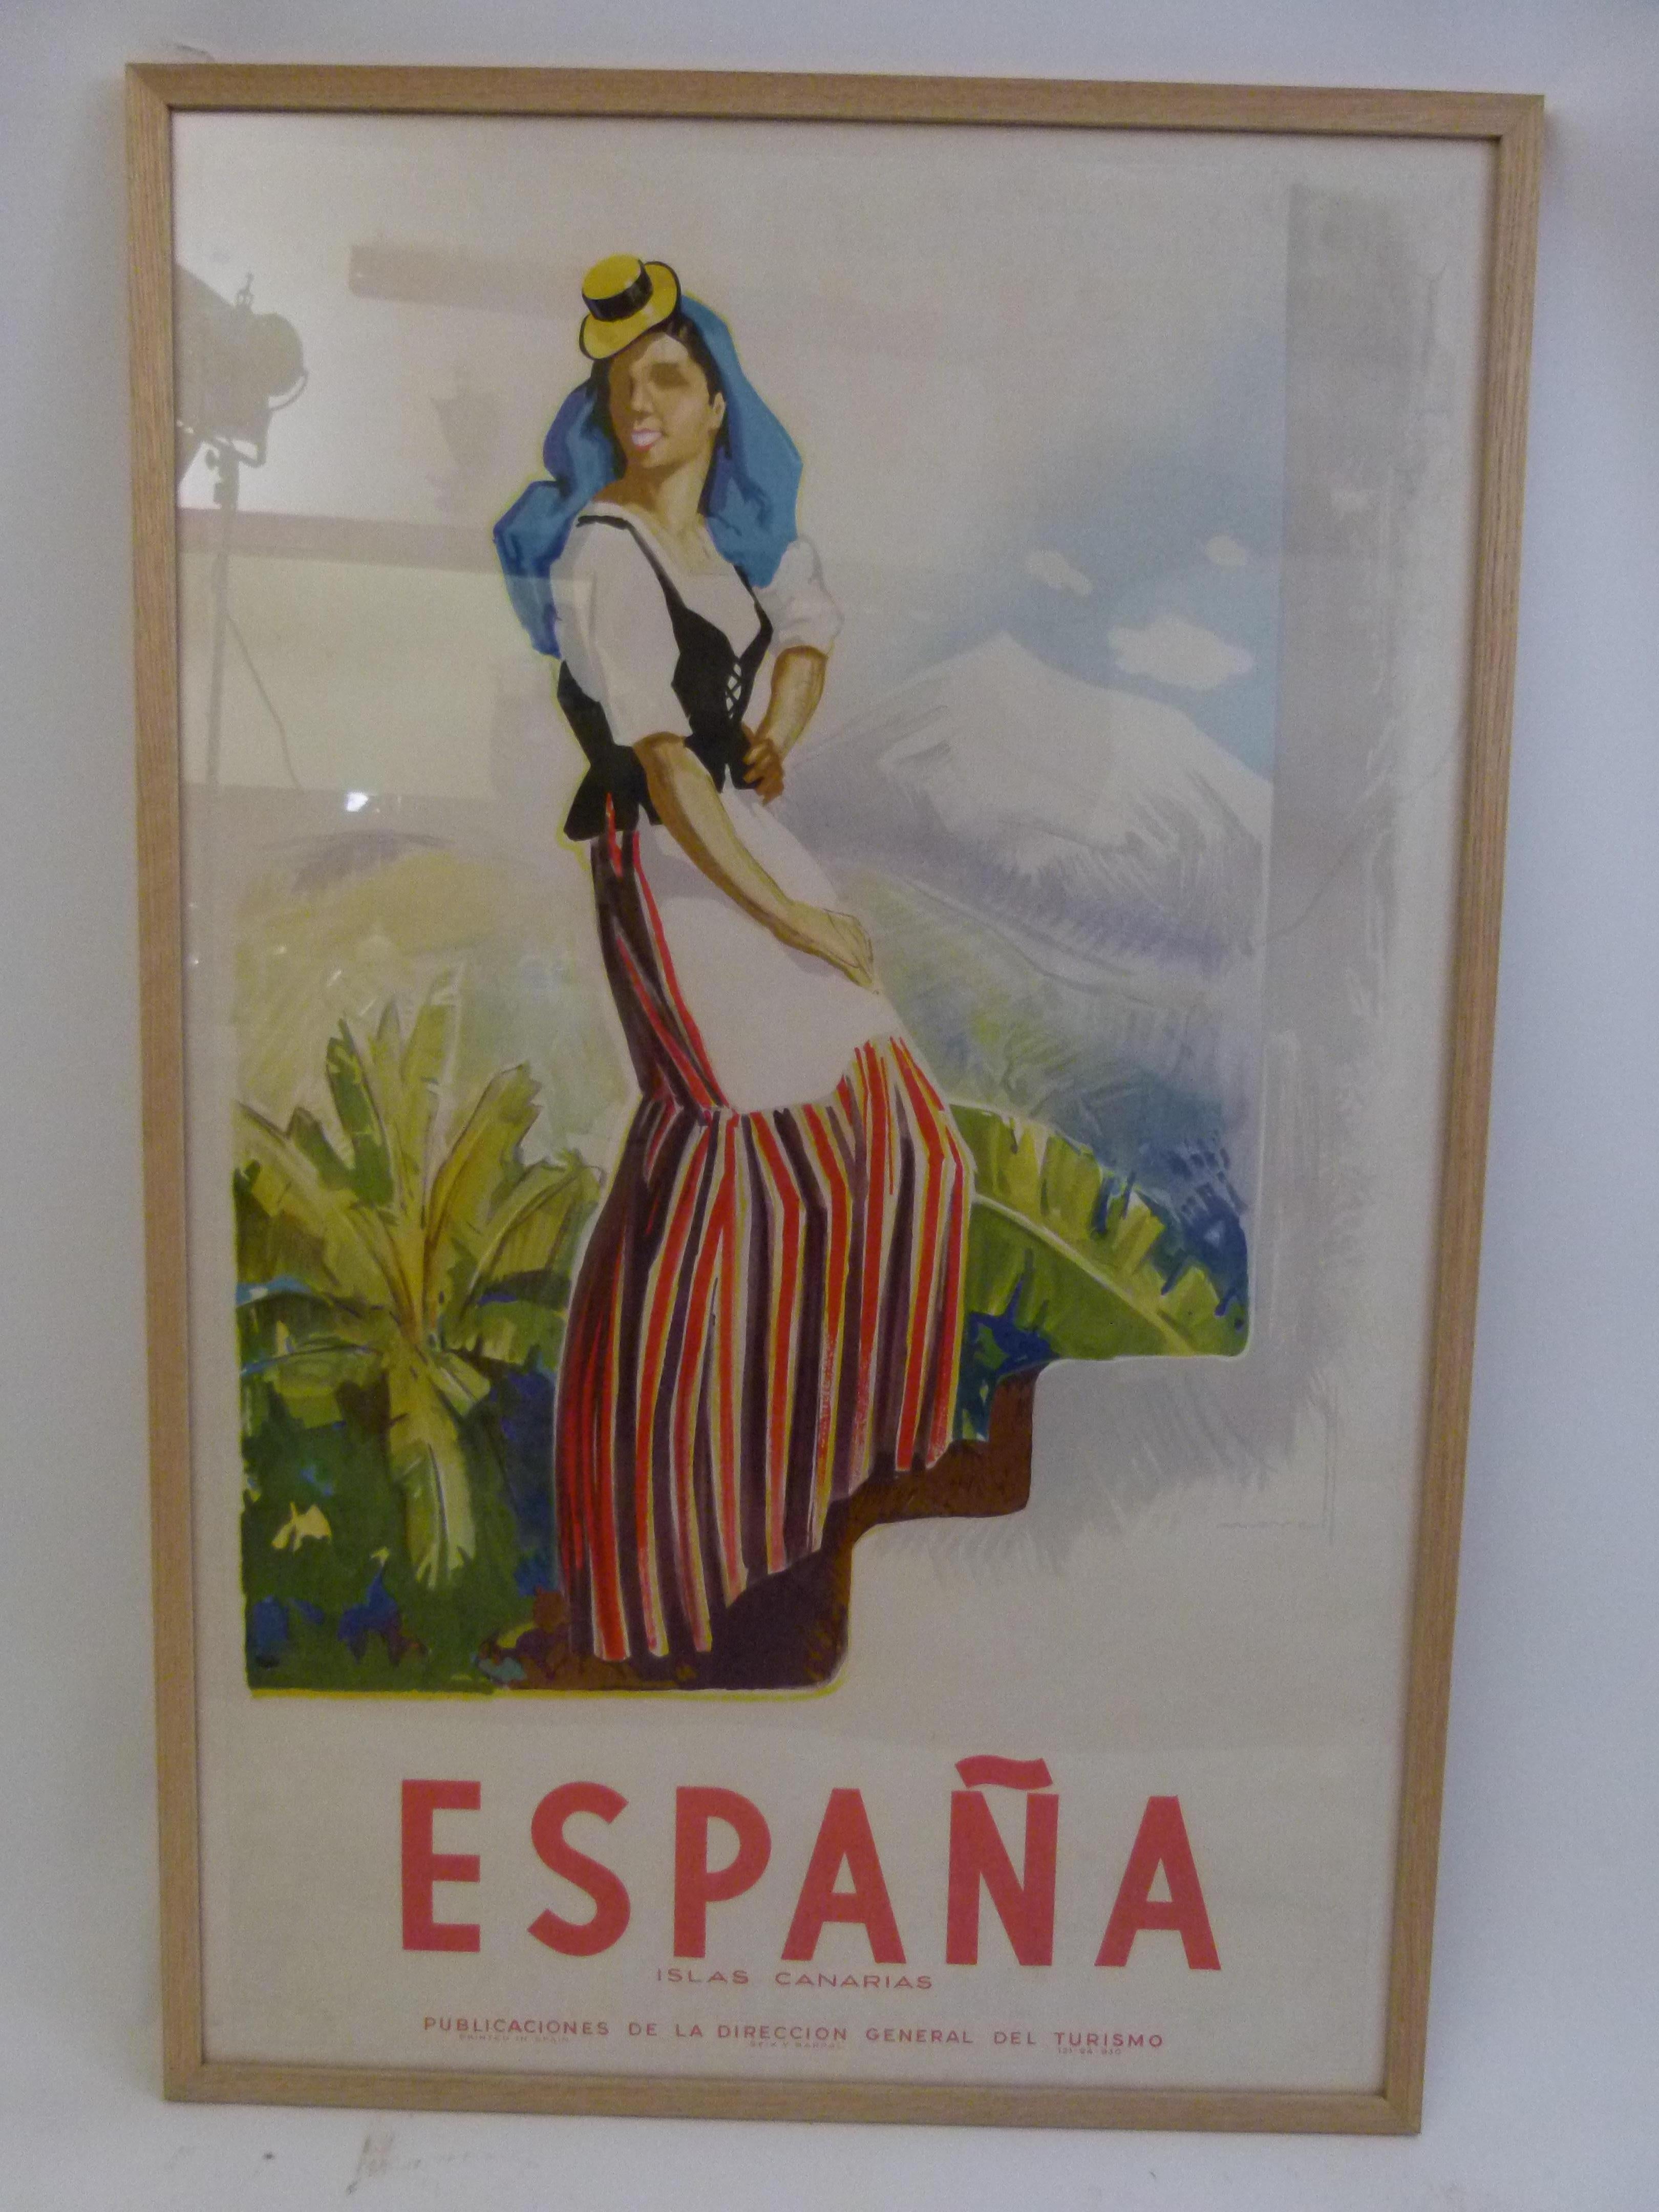 Paper Canary Islands Poster by Josep Morell, 1940s